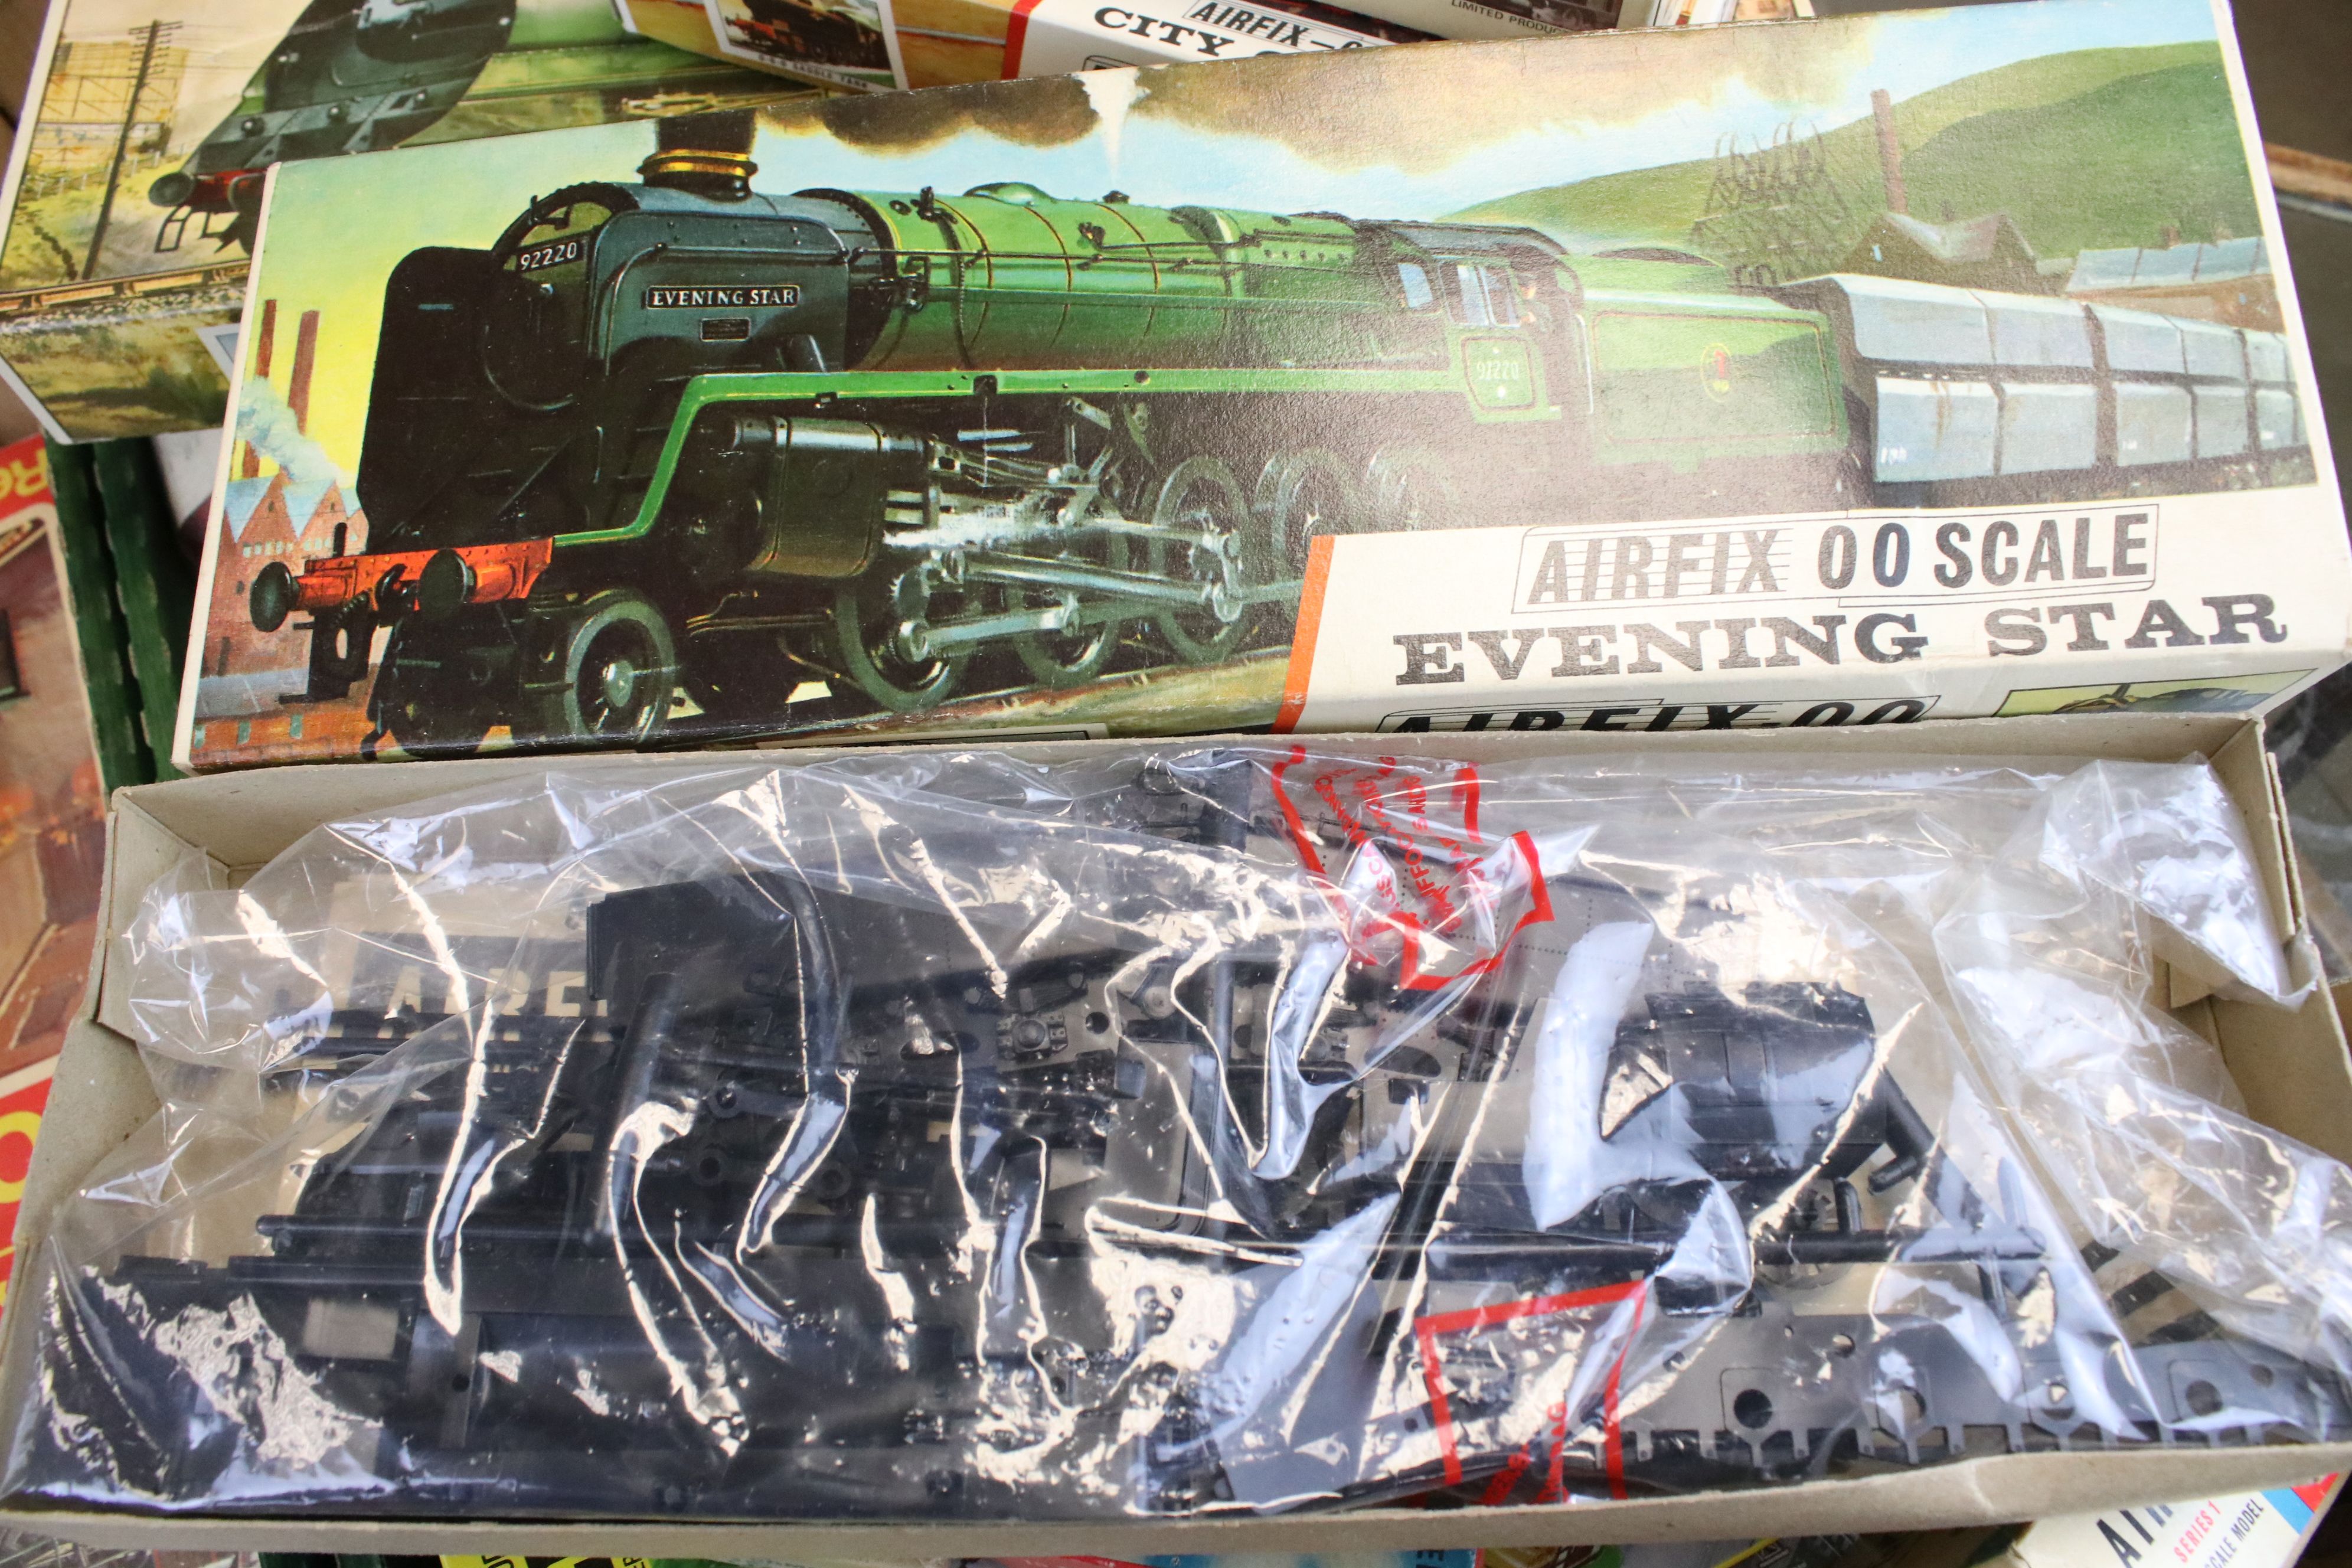 Airfix OO/HO - 44 Boxed & bagged Airfix plastic railway model kits to include 10 x locos (3 x 0-4- - Image 17 of 20